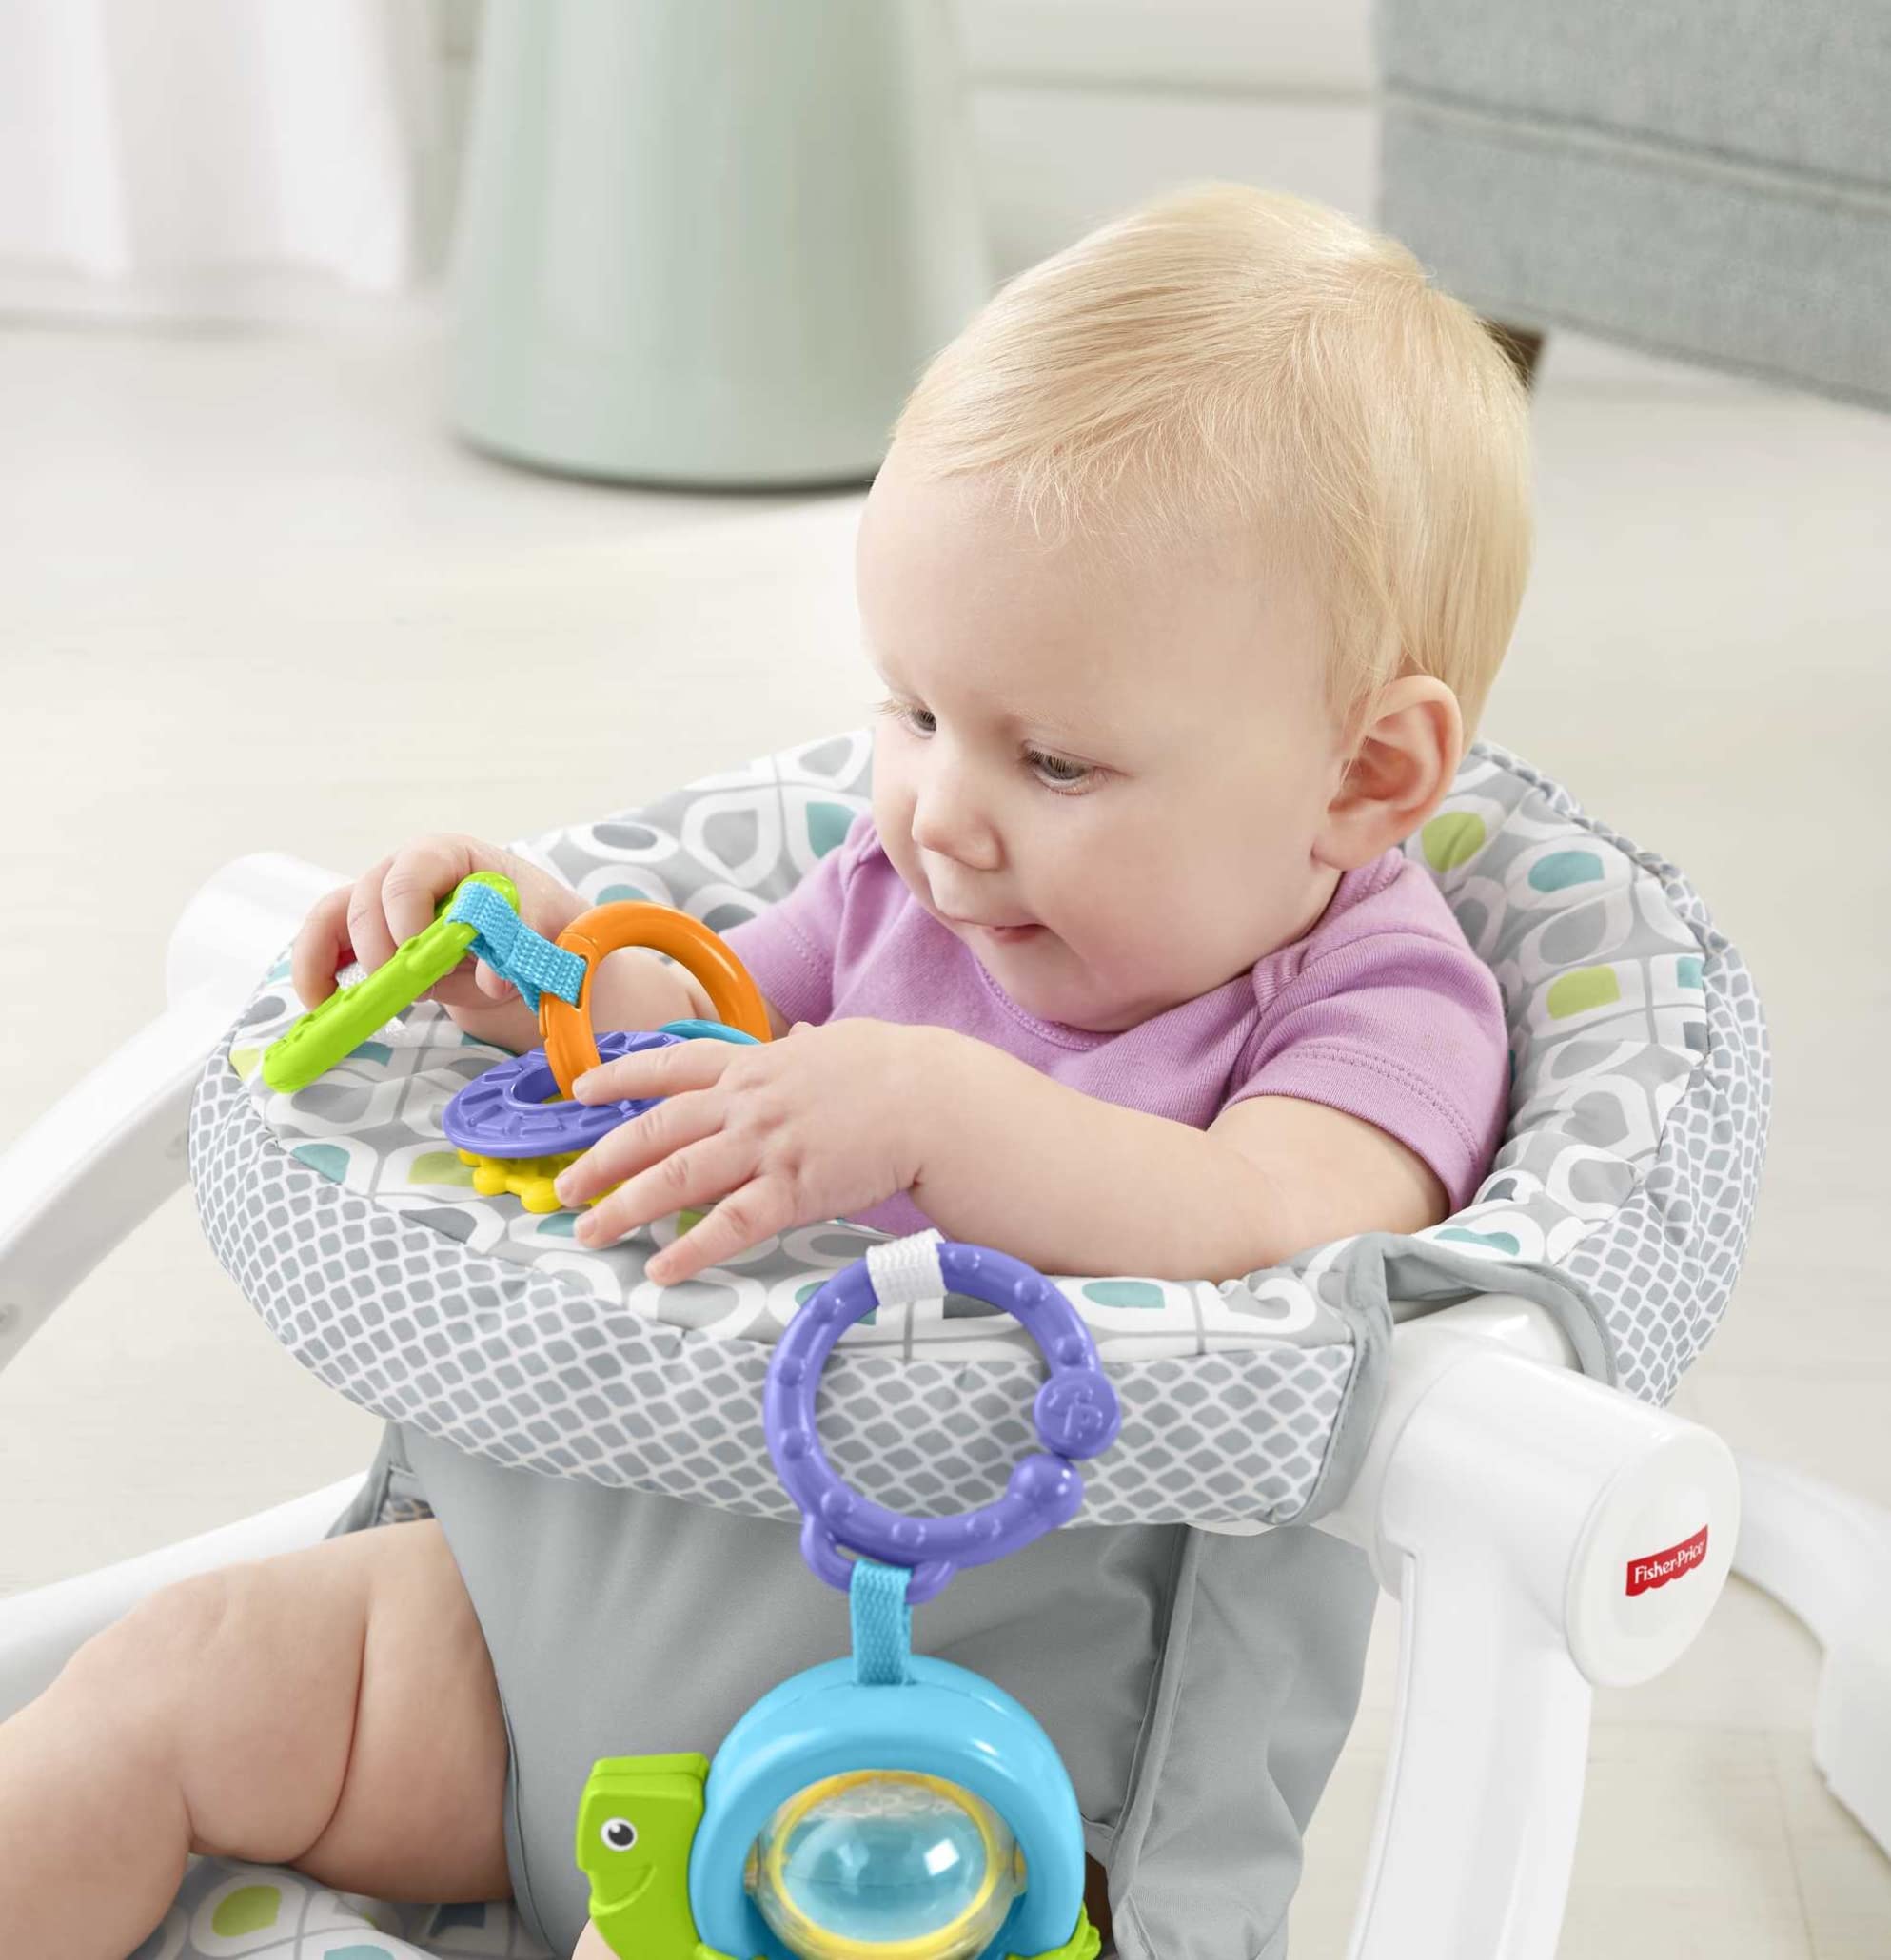 Fisher-Price Portable Bassinet and Travel Play Area, Indoor and Outdoor Use, On-The-Go Baby Dome, Windmill Fisher-Price Portable Baby Seat, Baby Chair for Sitting Up, Sit-Me-Up Floor Seat